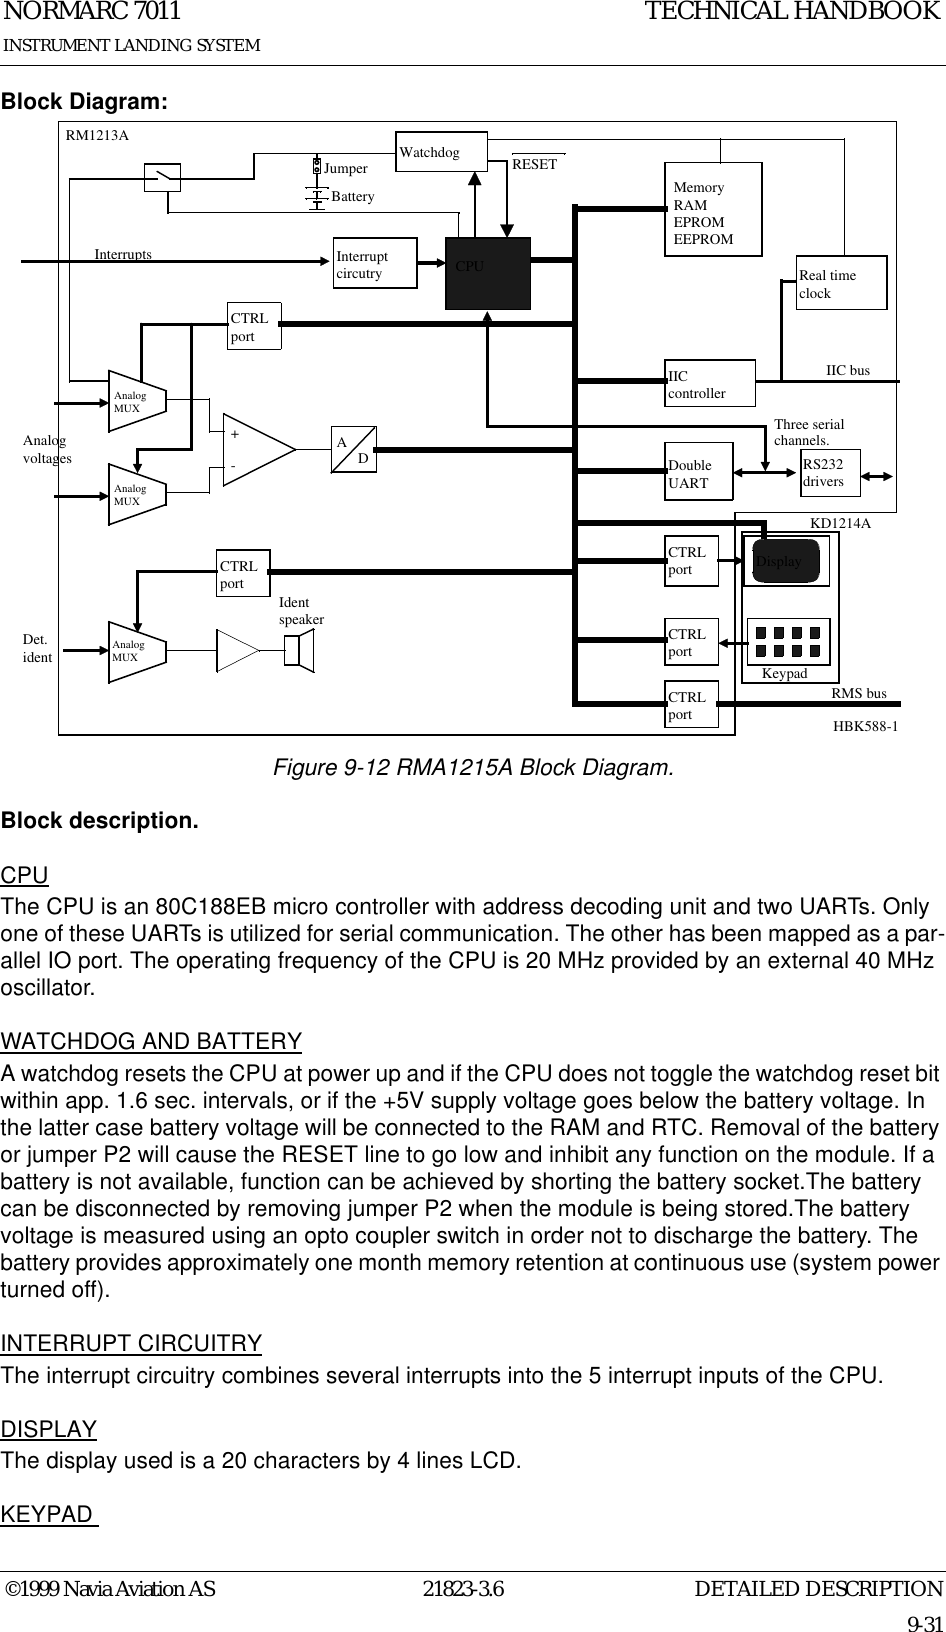 DETAILED DESCRIPTIONNORMARC 701121823-3.69-31INSTRUMENT LANDING SYSTEMTECHNICAL HANDBOOK©1999 Navia Aviation ASBlock Diagram:Figure 9-12 RMA1215A Block Diagram.Block description.CPUThe CPU is an 80C188EB micro controller with address decoding unit and two UARTs. Only one of these UARTs is utilized for serial communication. The other has been mapped as a par-allel IO port. The operating frequency of the CPU is 20 MHz provided by an external 40 MHz oscillator.WATCHDOG AND BATTERYA watchdog resets the CPU at power up and if the CPU does not toggle the watchdog reset bit within app. 1.6 sec. intervals, or if the +5V supply voltage goes below the battery voltage. In the latter case battery voltage will be connected to the RAM and RTC. Removal of the battery or jumper P2 will cause the RESET line to go low and inhibit any function on the module. If a battery is not available, function can be achieved by shorting the battery socket.The battery can be disconnected by removing jumper P2 when the module is being stored.The battery voltage is measured using an opto coupler switch in order not to discharge the battery. The battery provides approximately one month memory retention at continuous use (system power turned off).INTERRUPT CIRCUITRYThe interrupt circuitry combines several interrupts into the 5 interrupt inputs of the CPU.DISPLAYThe display used is a 20 characters by 4 lines LCD.KEYPAD +-Identspeaker channels.IIC busInterruptsAnalogvoltagesDet.identJumperCPUCTRLportCTRLportCTRLportRMS busDoubleUARTCTRLportAnalogMUXAnalogMUXAnalogMUXInterruptcircutryCTRLportADKeypadDisplayKD1214ARM1213A WatchdogIICcontrollerBatteryRESETMemoryRAMEPROMEEPROMReal timeclockRS232driversThree serialHBK588-1